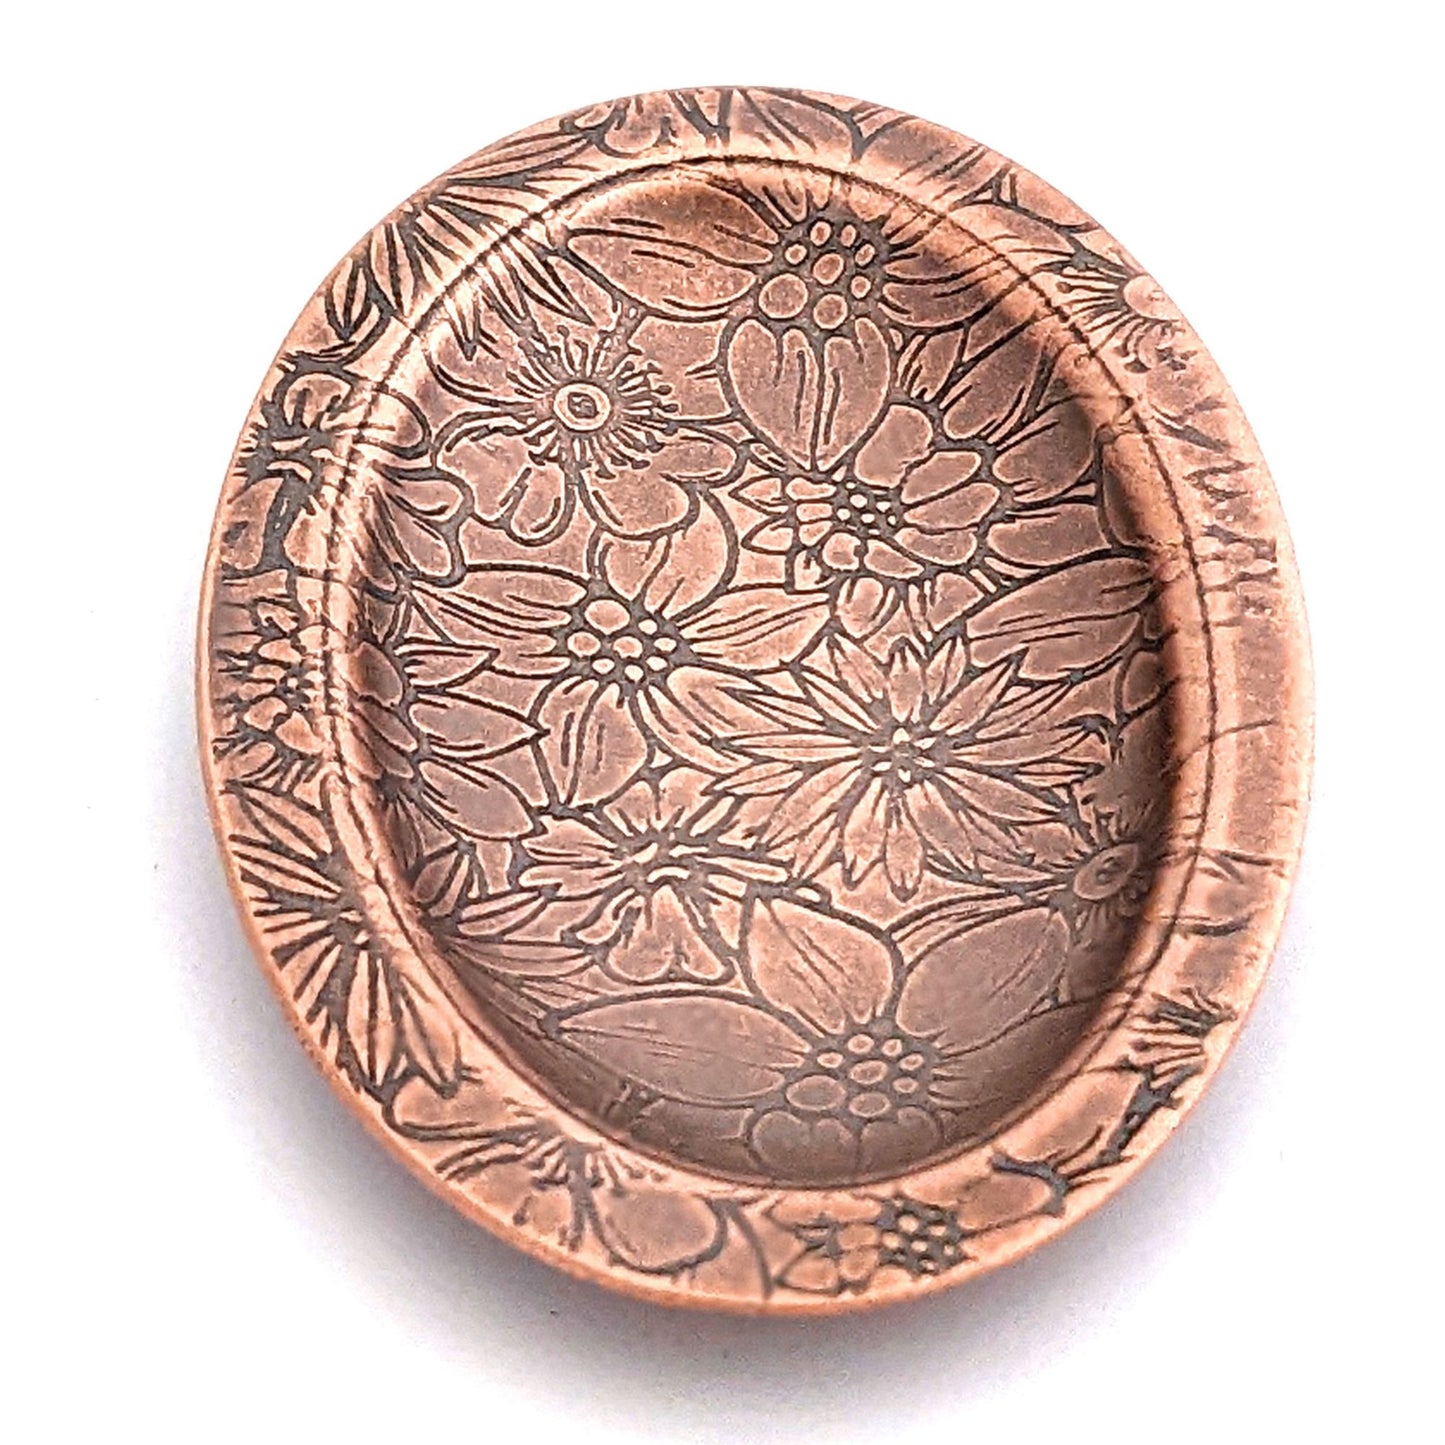 Copper oval ring dish with repeating pattern of assortment of flowers.  Dish is 2 inches by three inches with a raised lip.